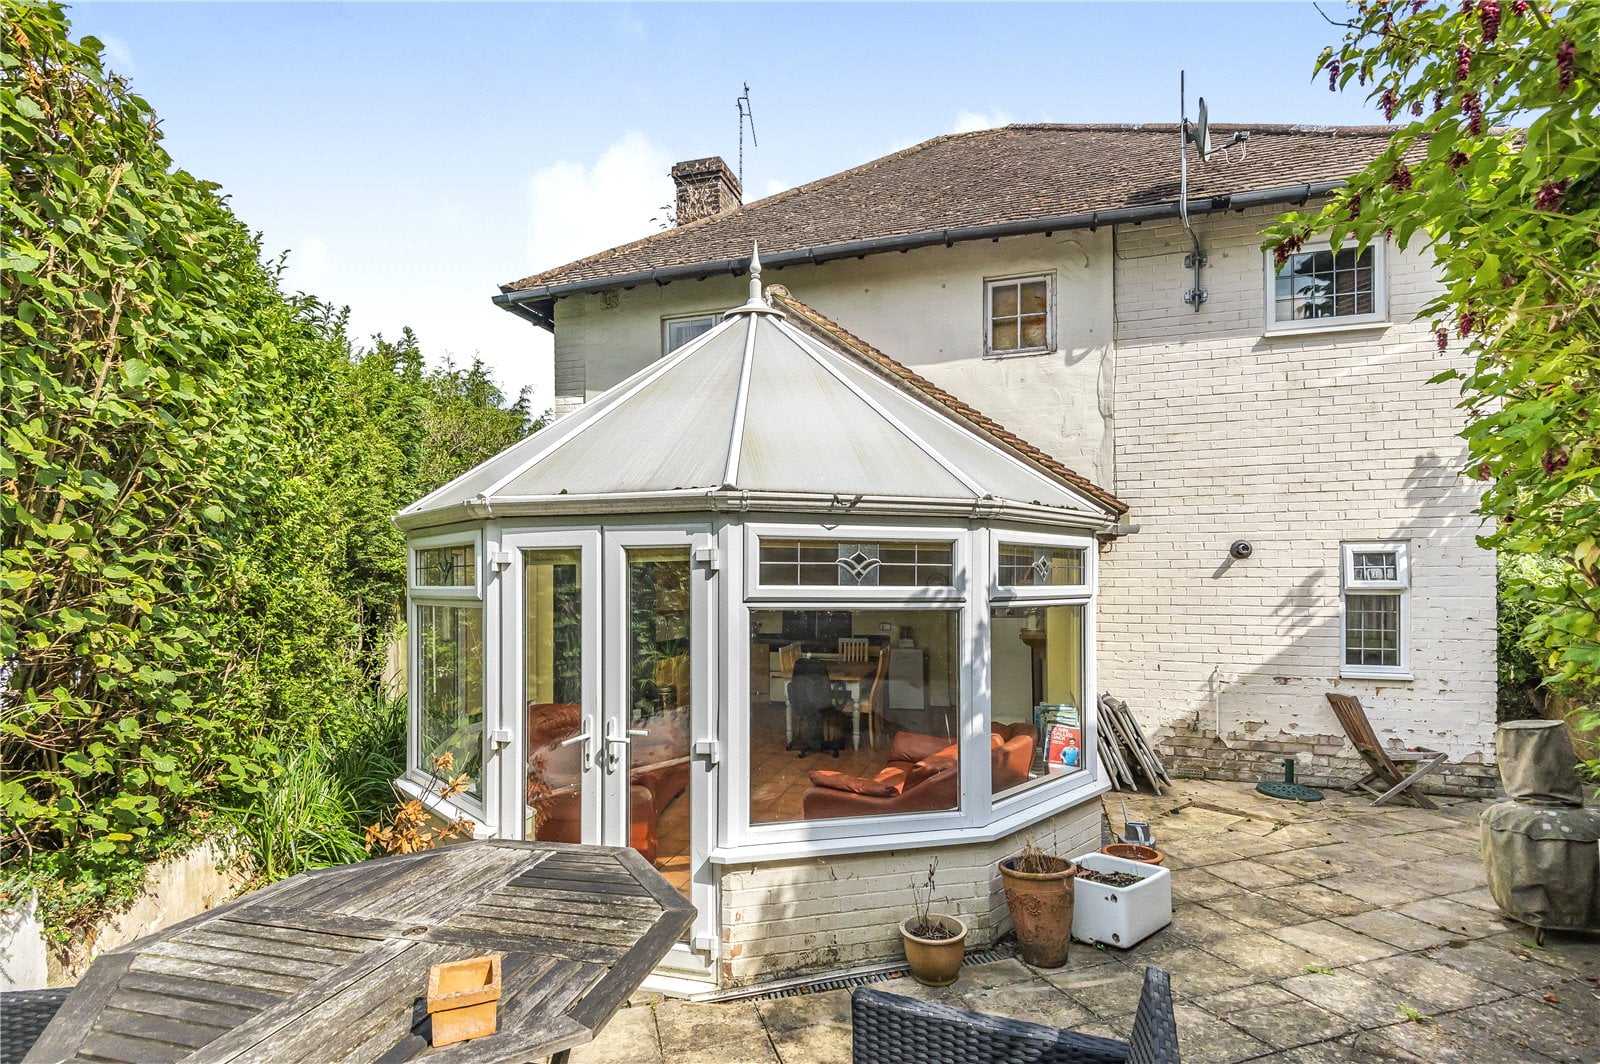 Park Crescent, Forest Row, East Sussex,  | residential-sales